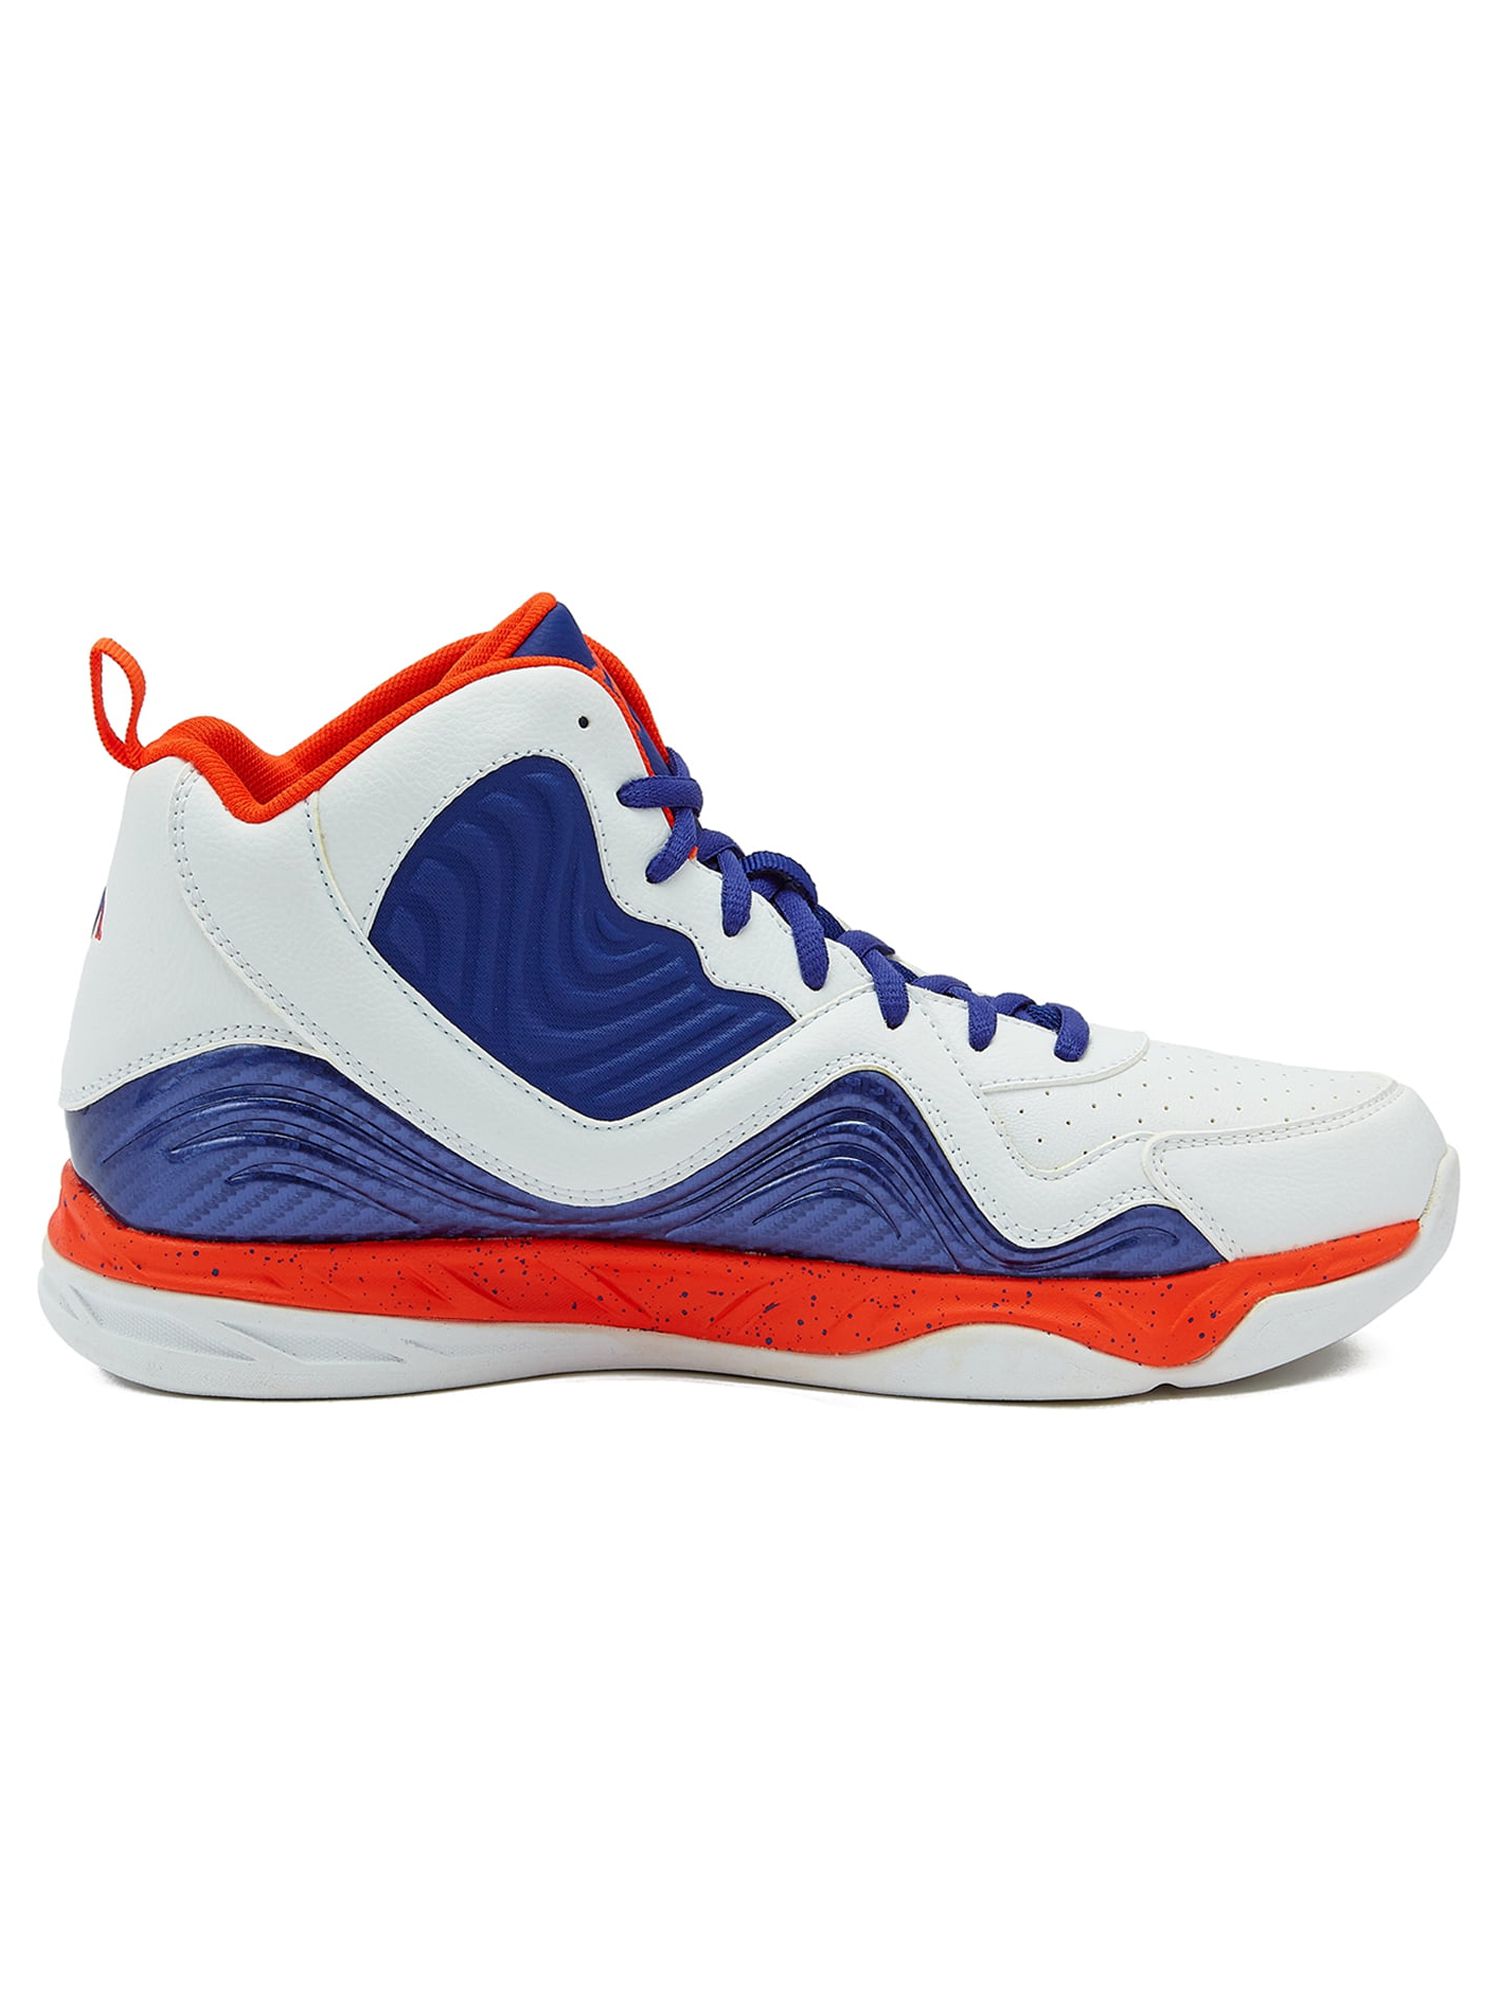 AND1 Men's Maverick Basketball High-Top Sneakers - image 2 of 5